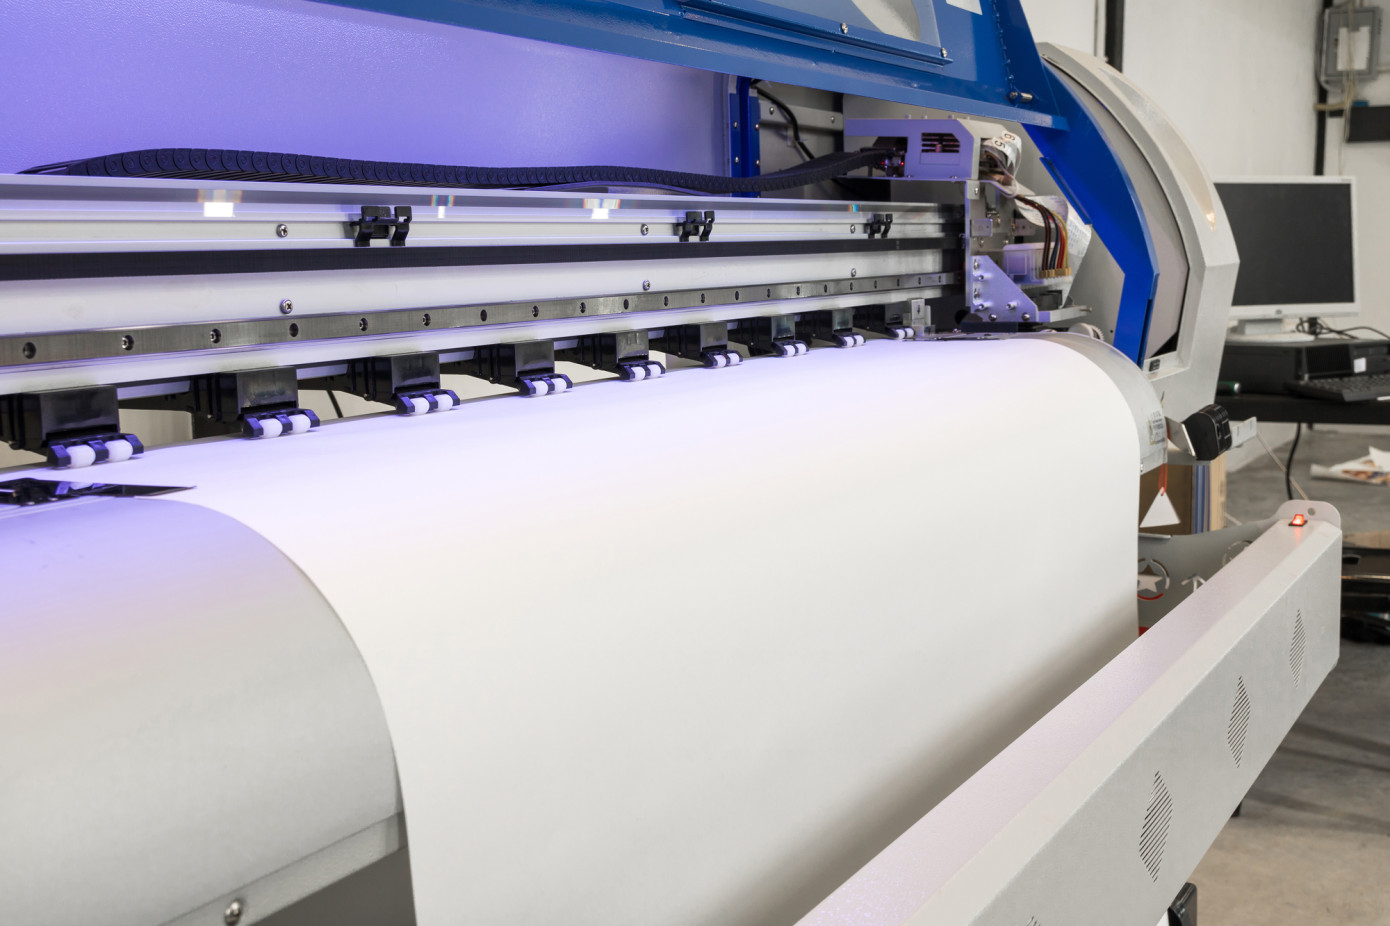 U.S. printing-writing paper shipments increased by 1% in May